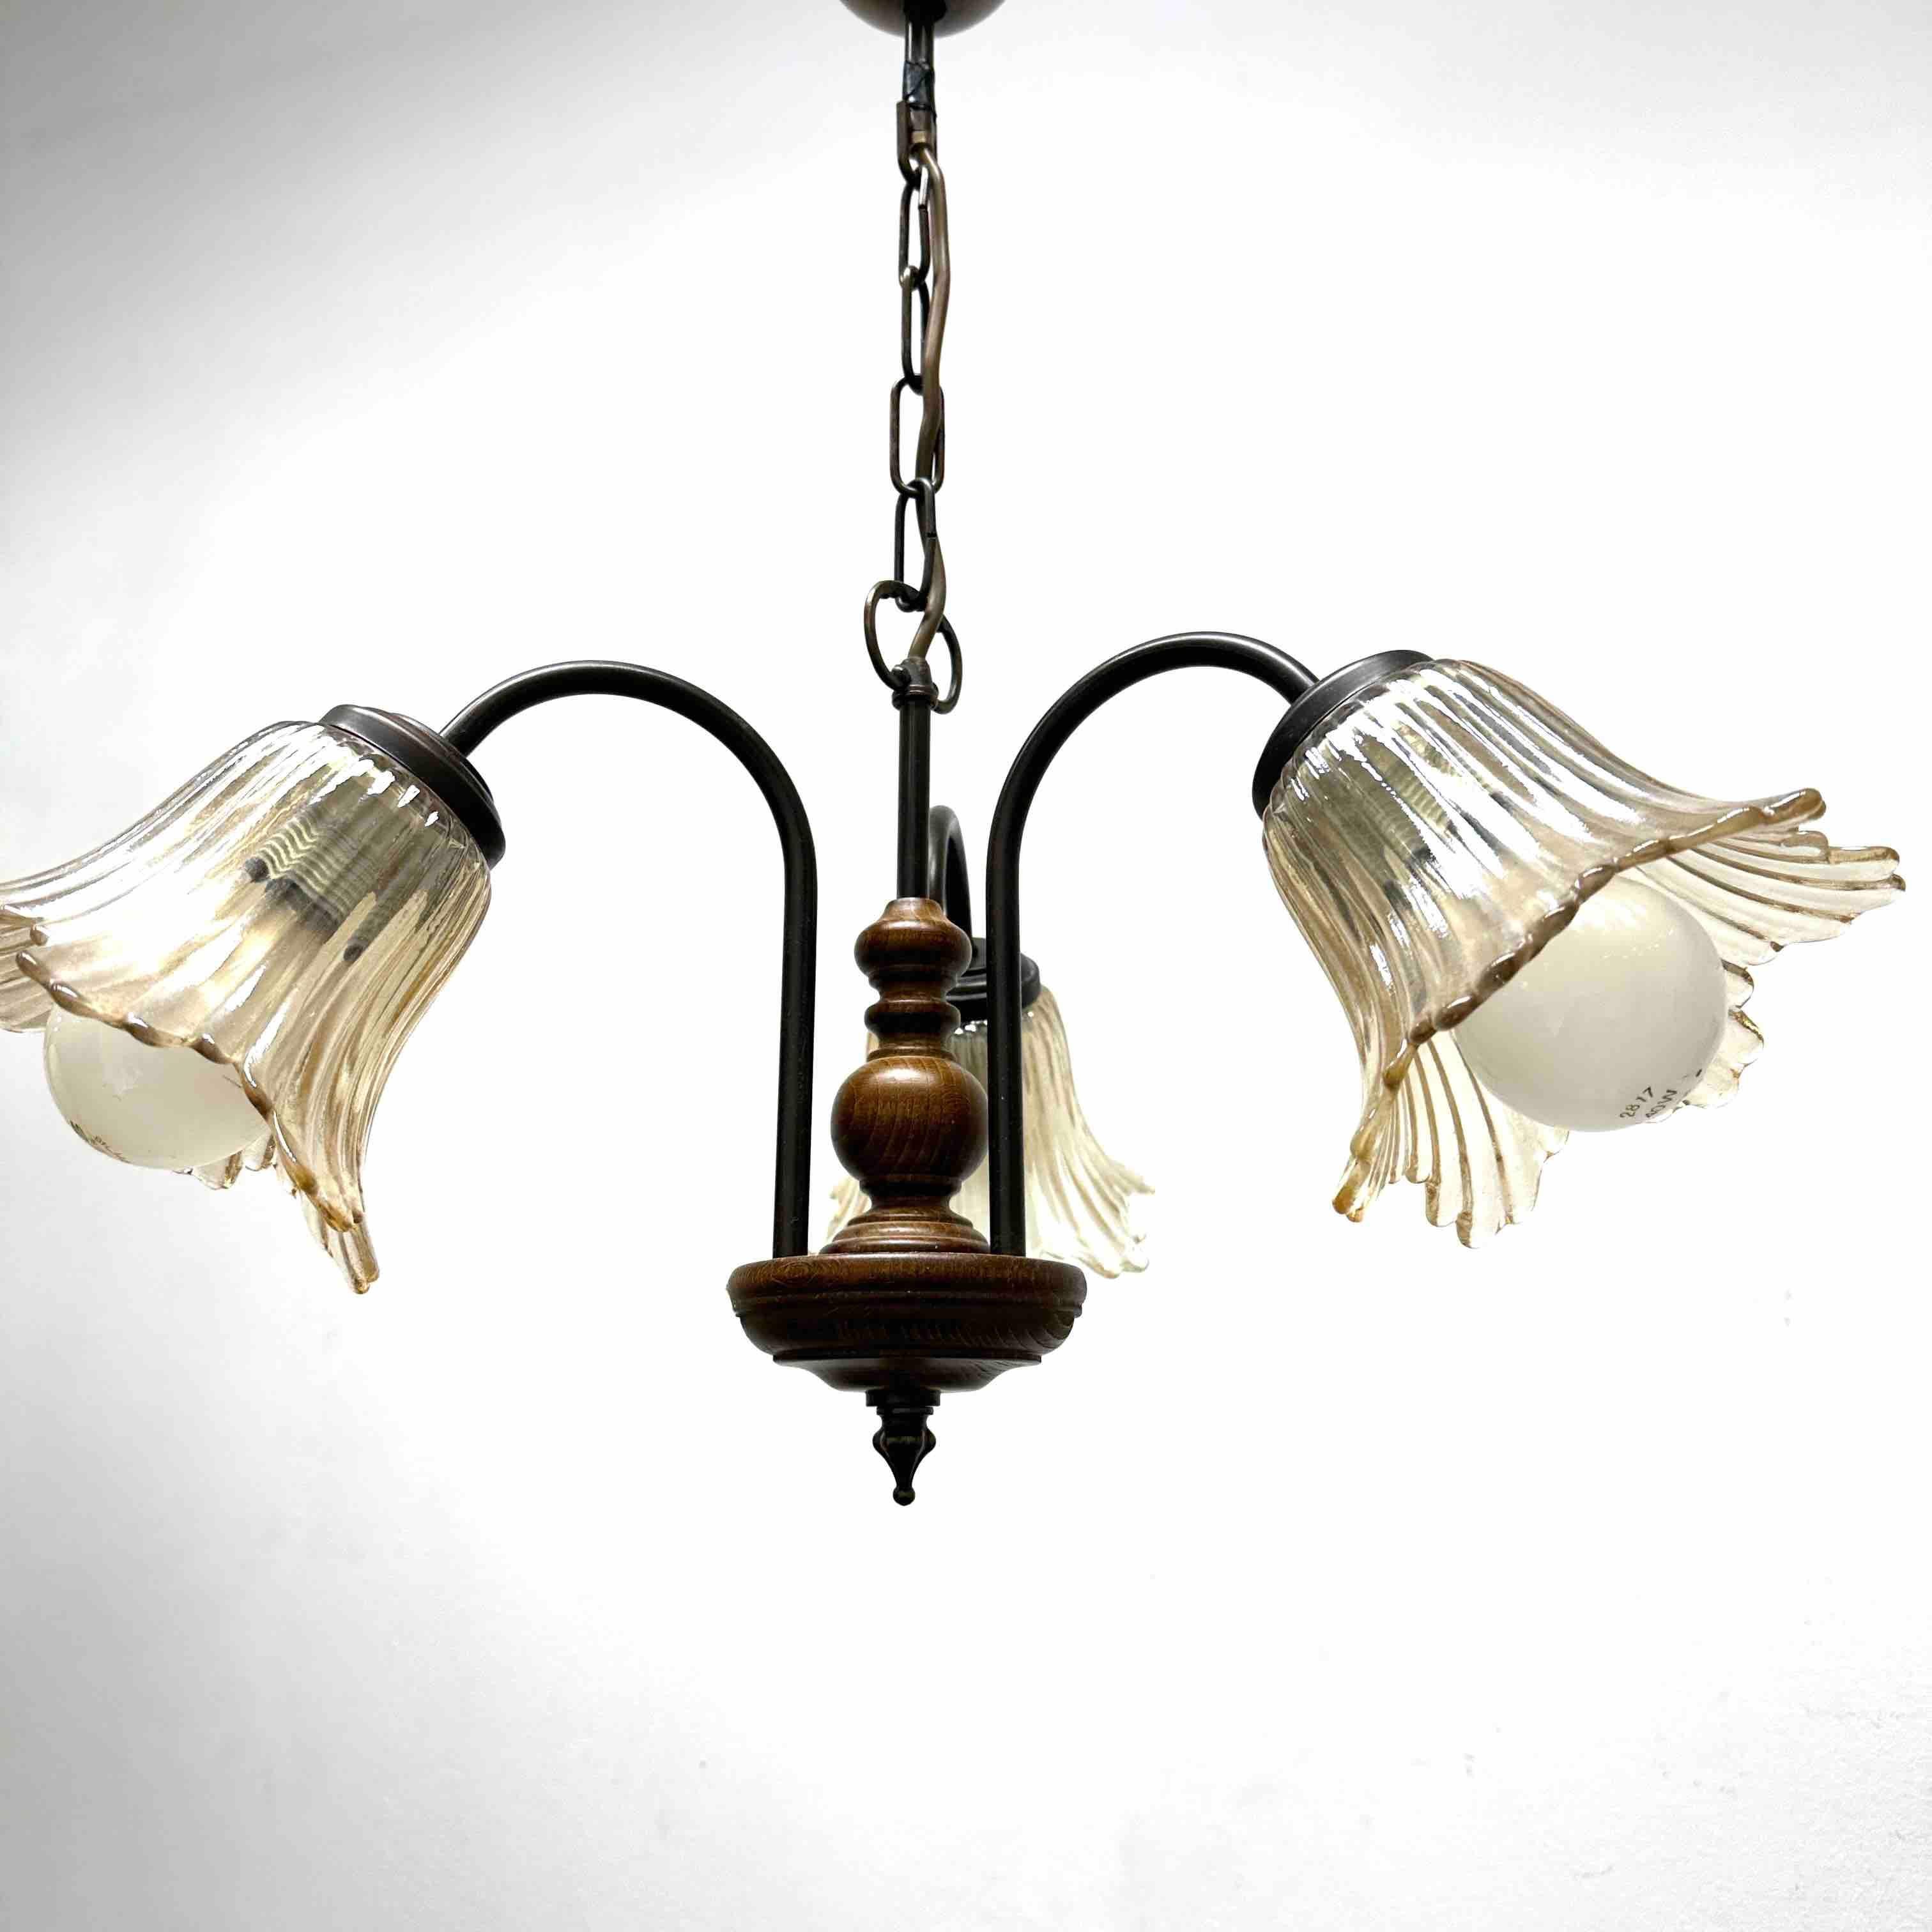 Gorgeous German Tole Wood Metal Glas Shade Three Light Chandelier, 1970s For Sale 4